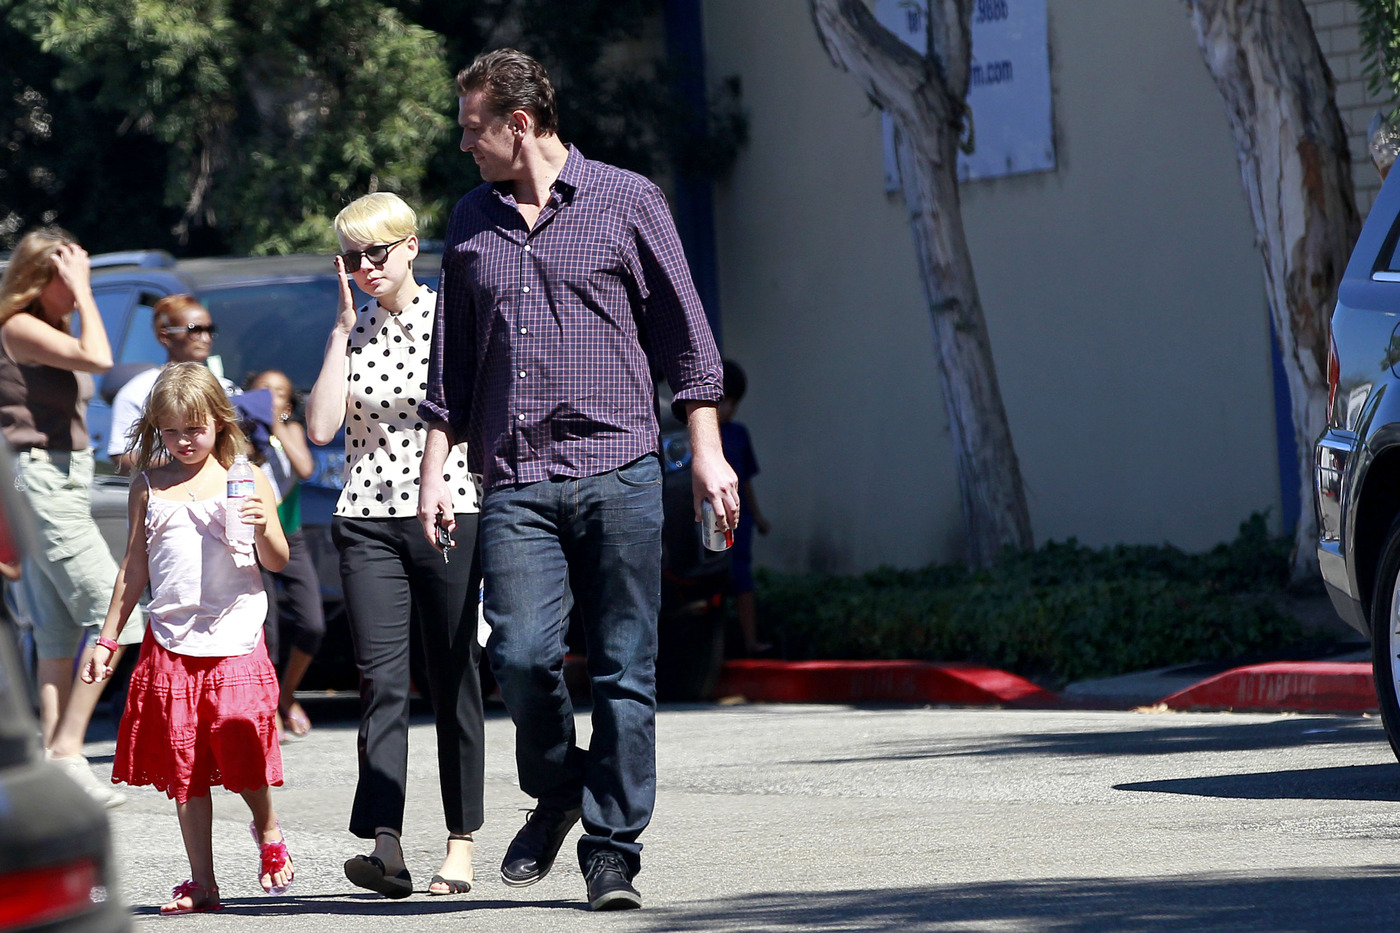 Jason Segel and Michelle Williams treat her daughter Matilda Ledger to ice cream and In-N-Out Burger in Los Angeles